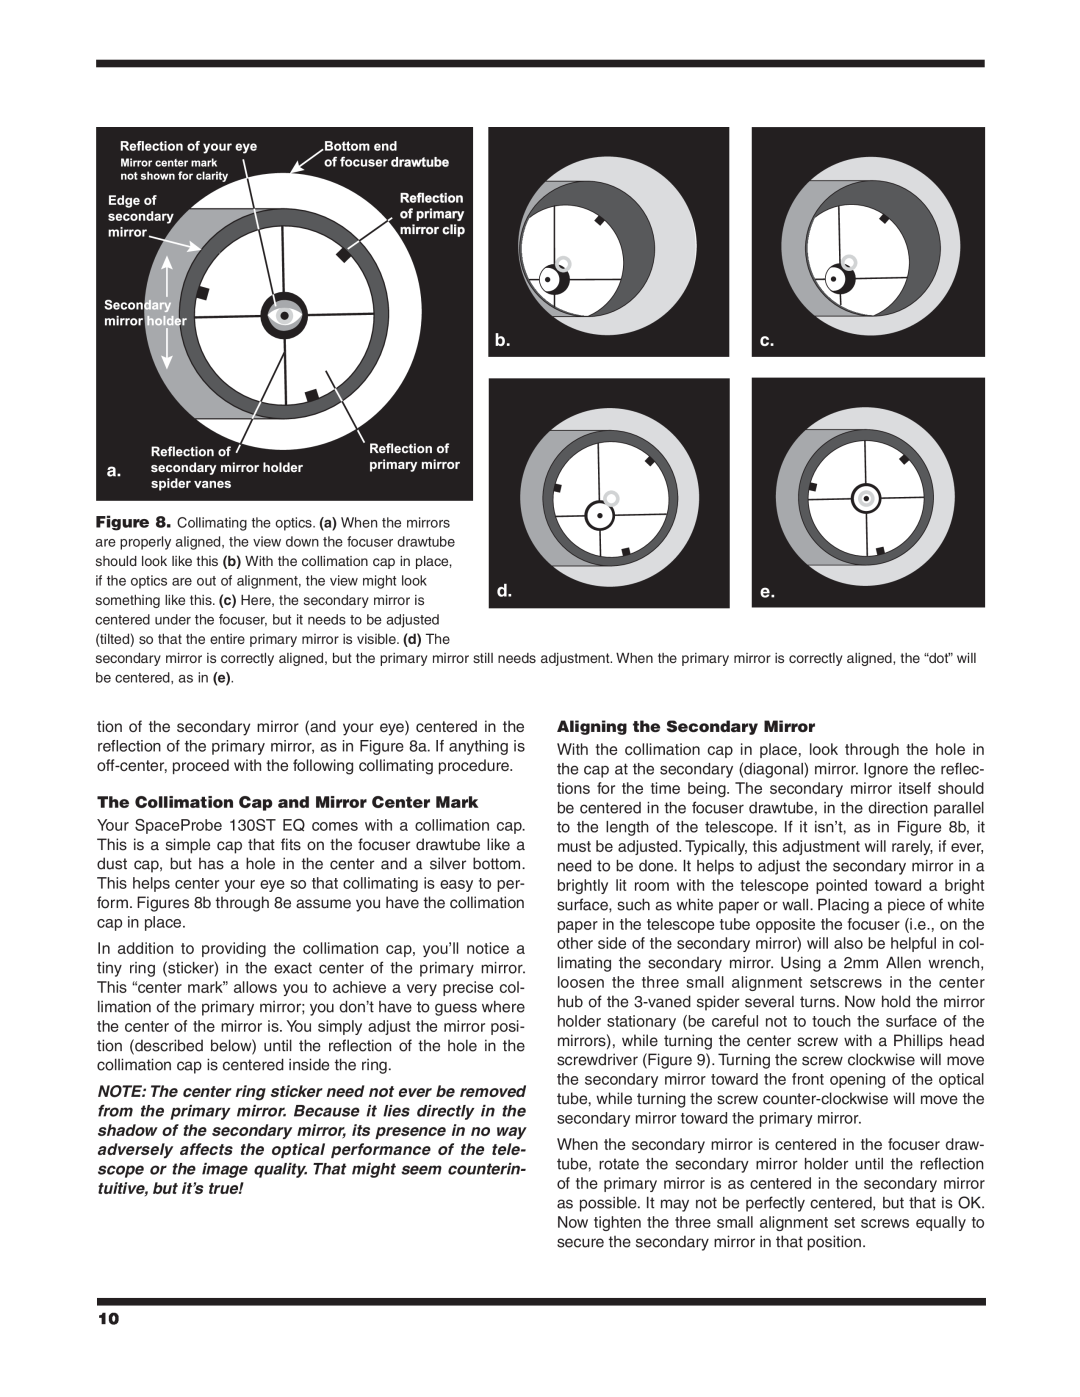 Orion 130ST EQ instruction manual b.c a, The Collimation Cap and Mirror Center Mark, Aligning the Secondary Mirror 